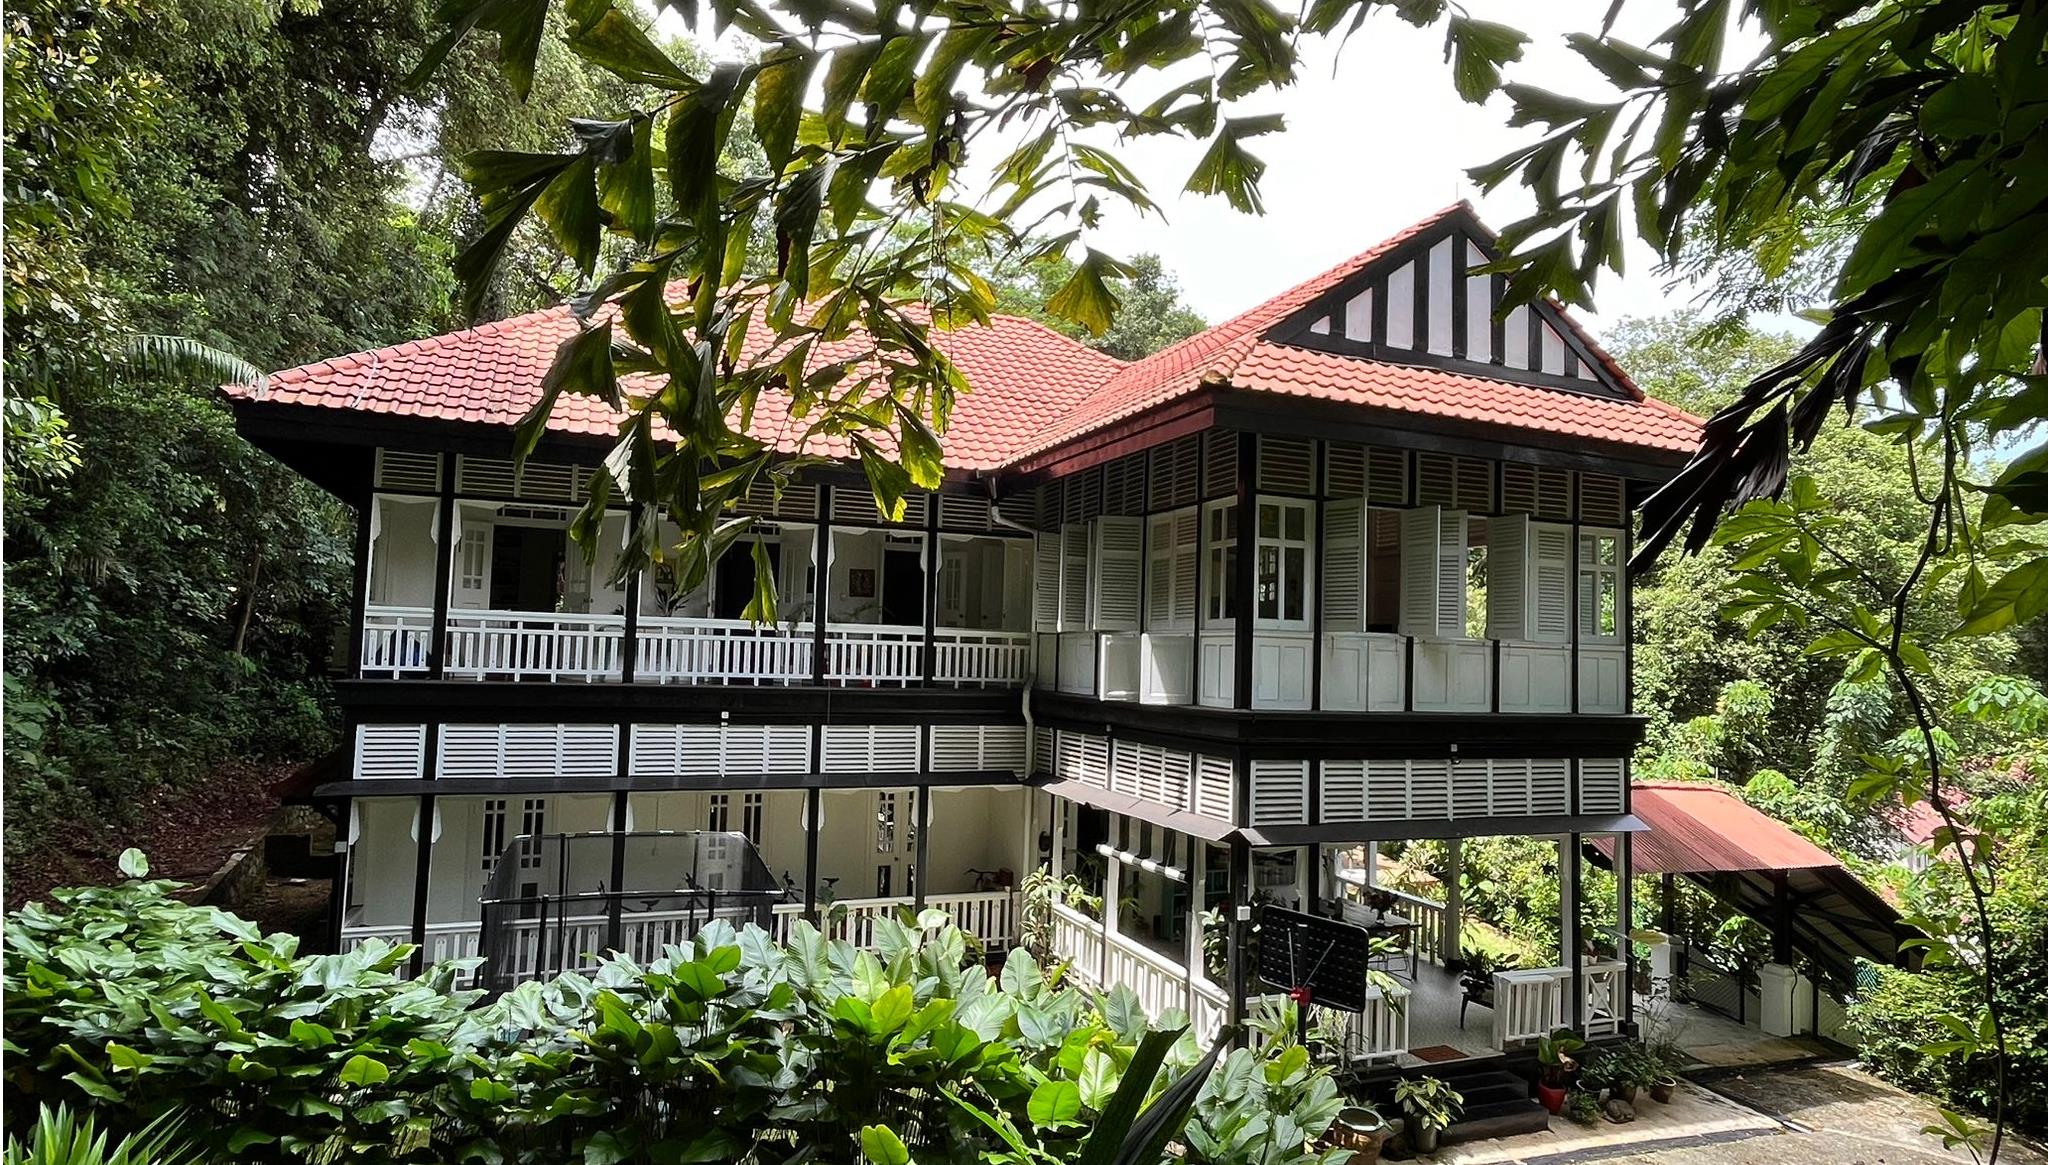 The Black and White Houses of Singapore